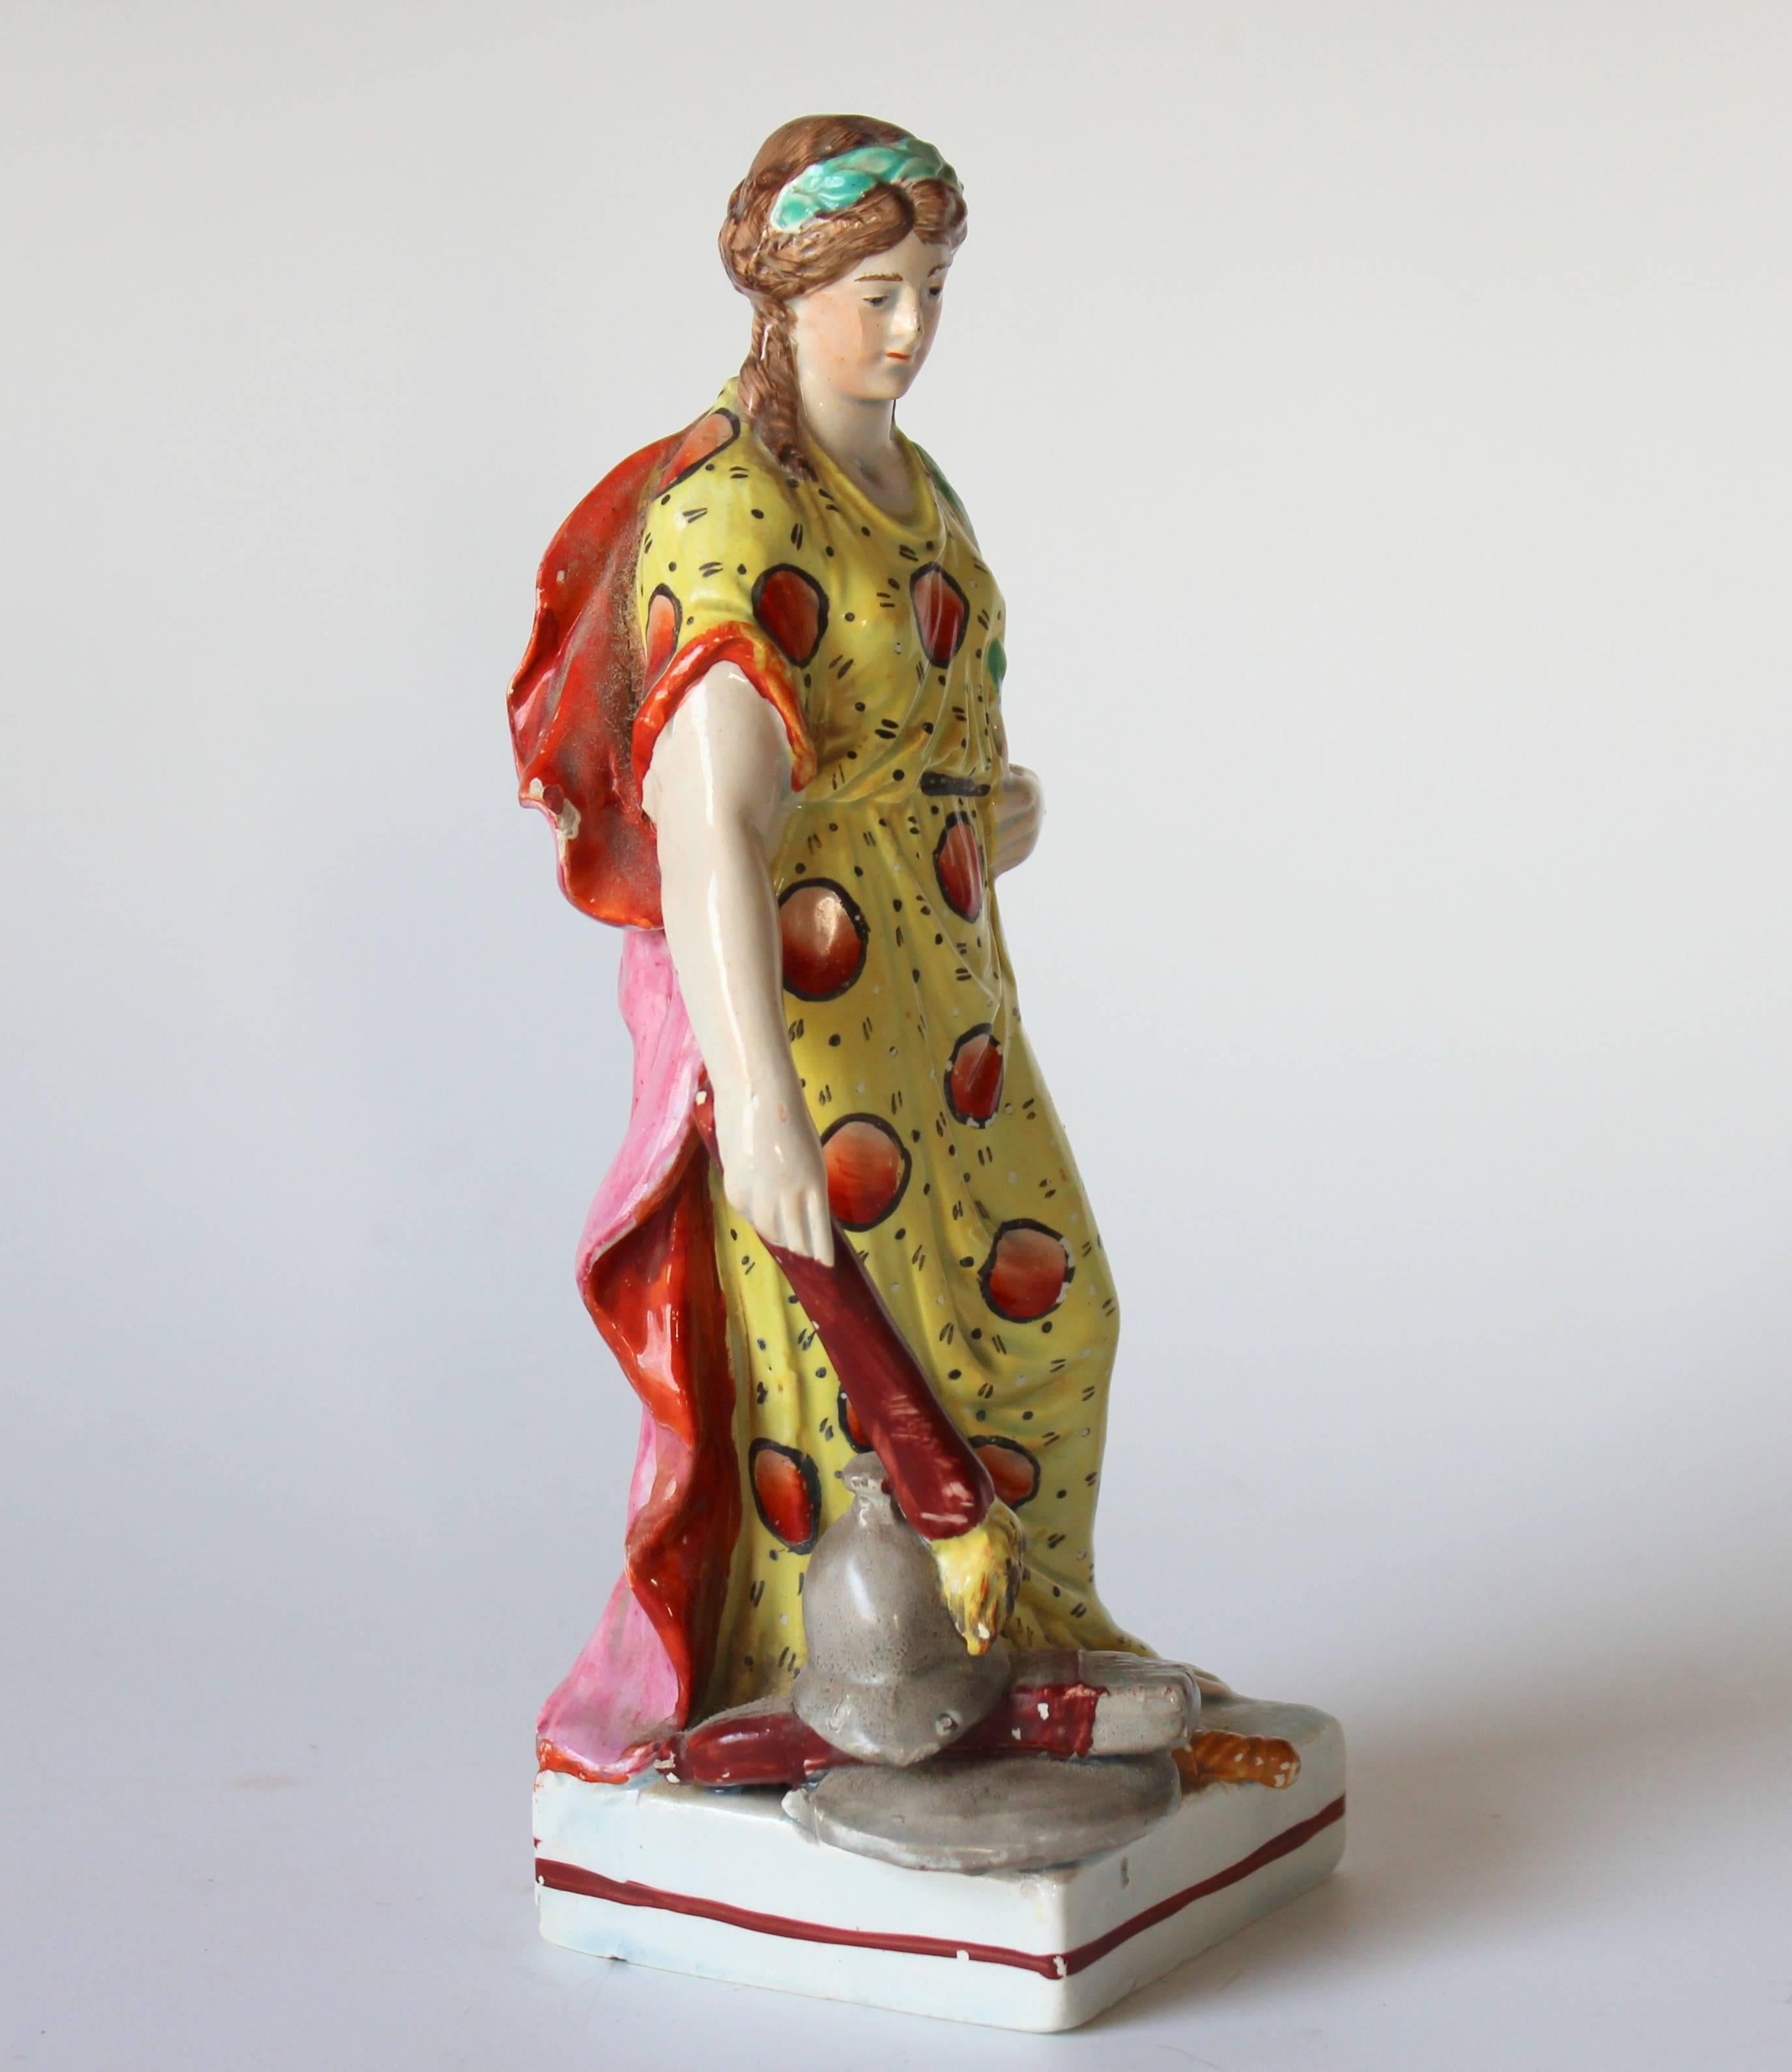 Classical Greek Antique English Staffordshire Pearlware Lady Victory Figure